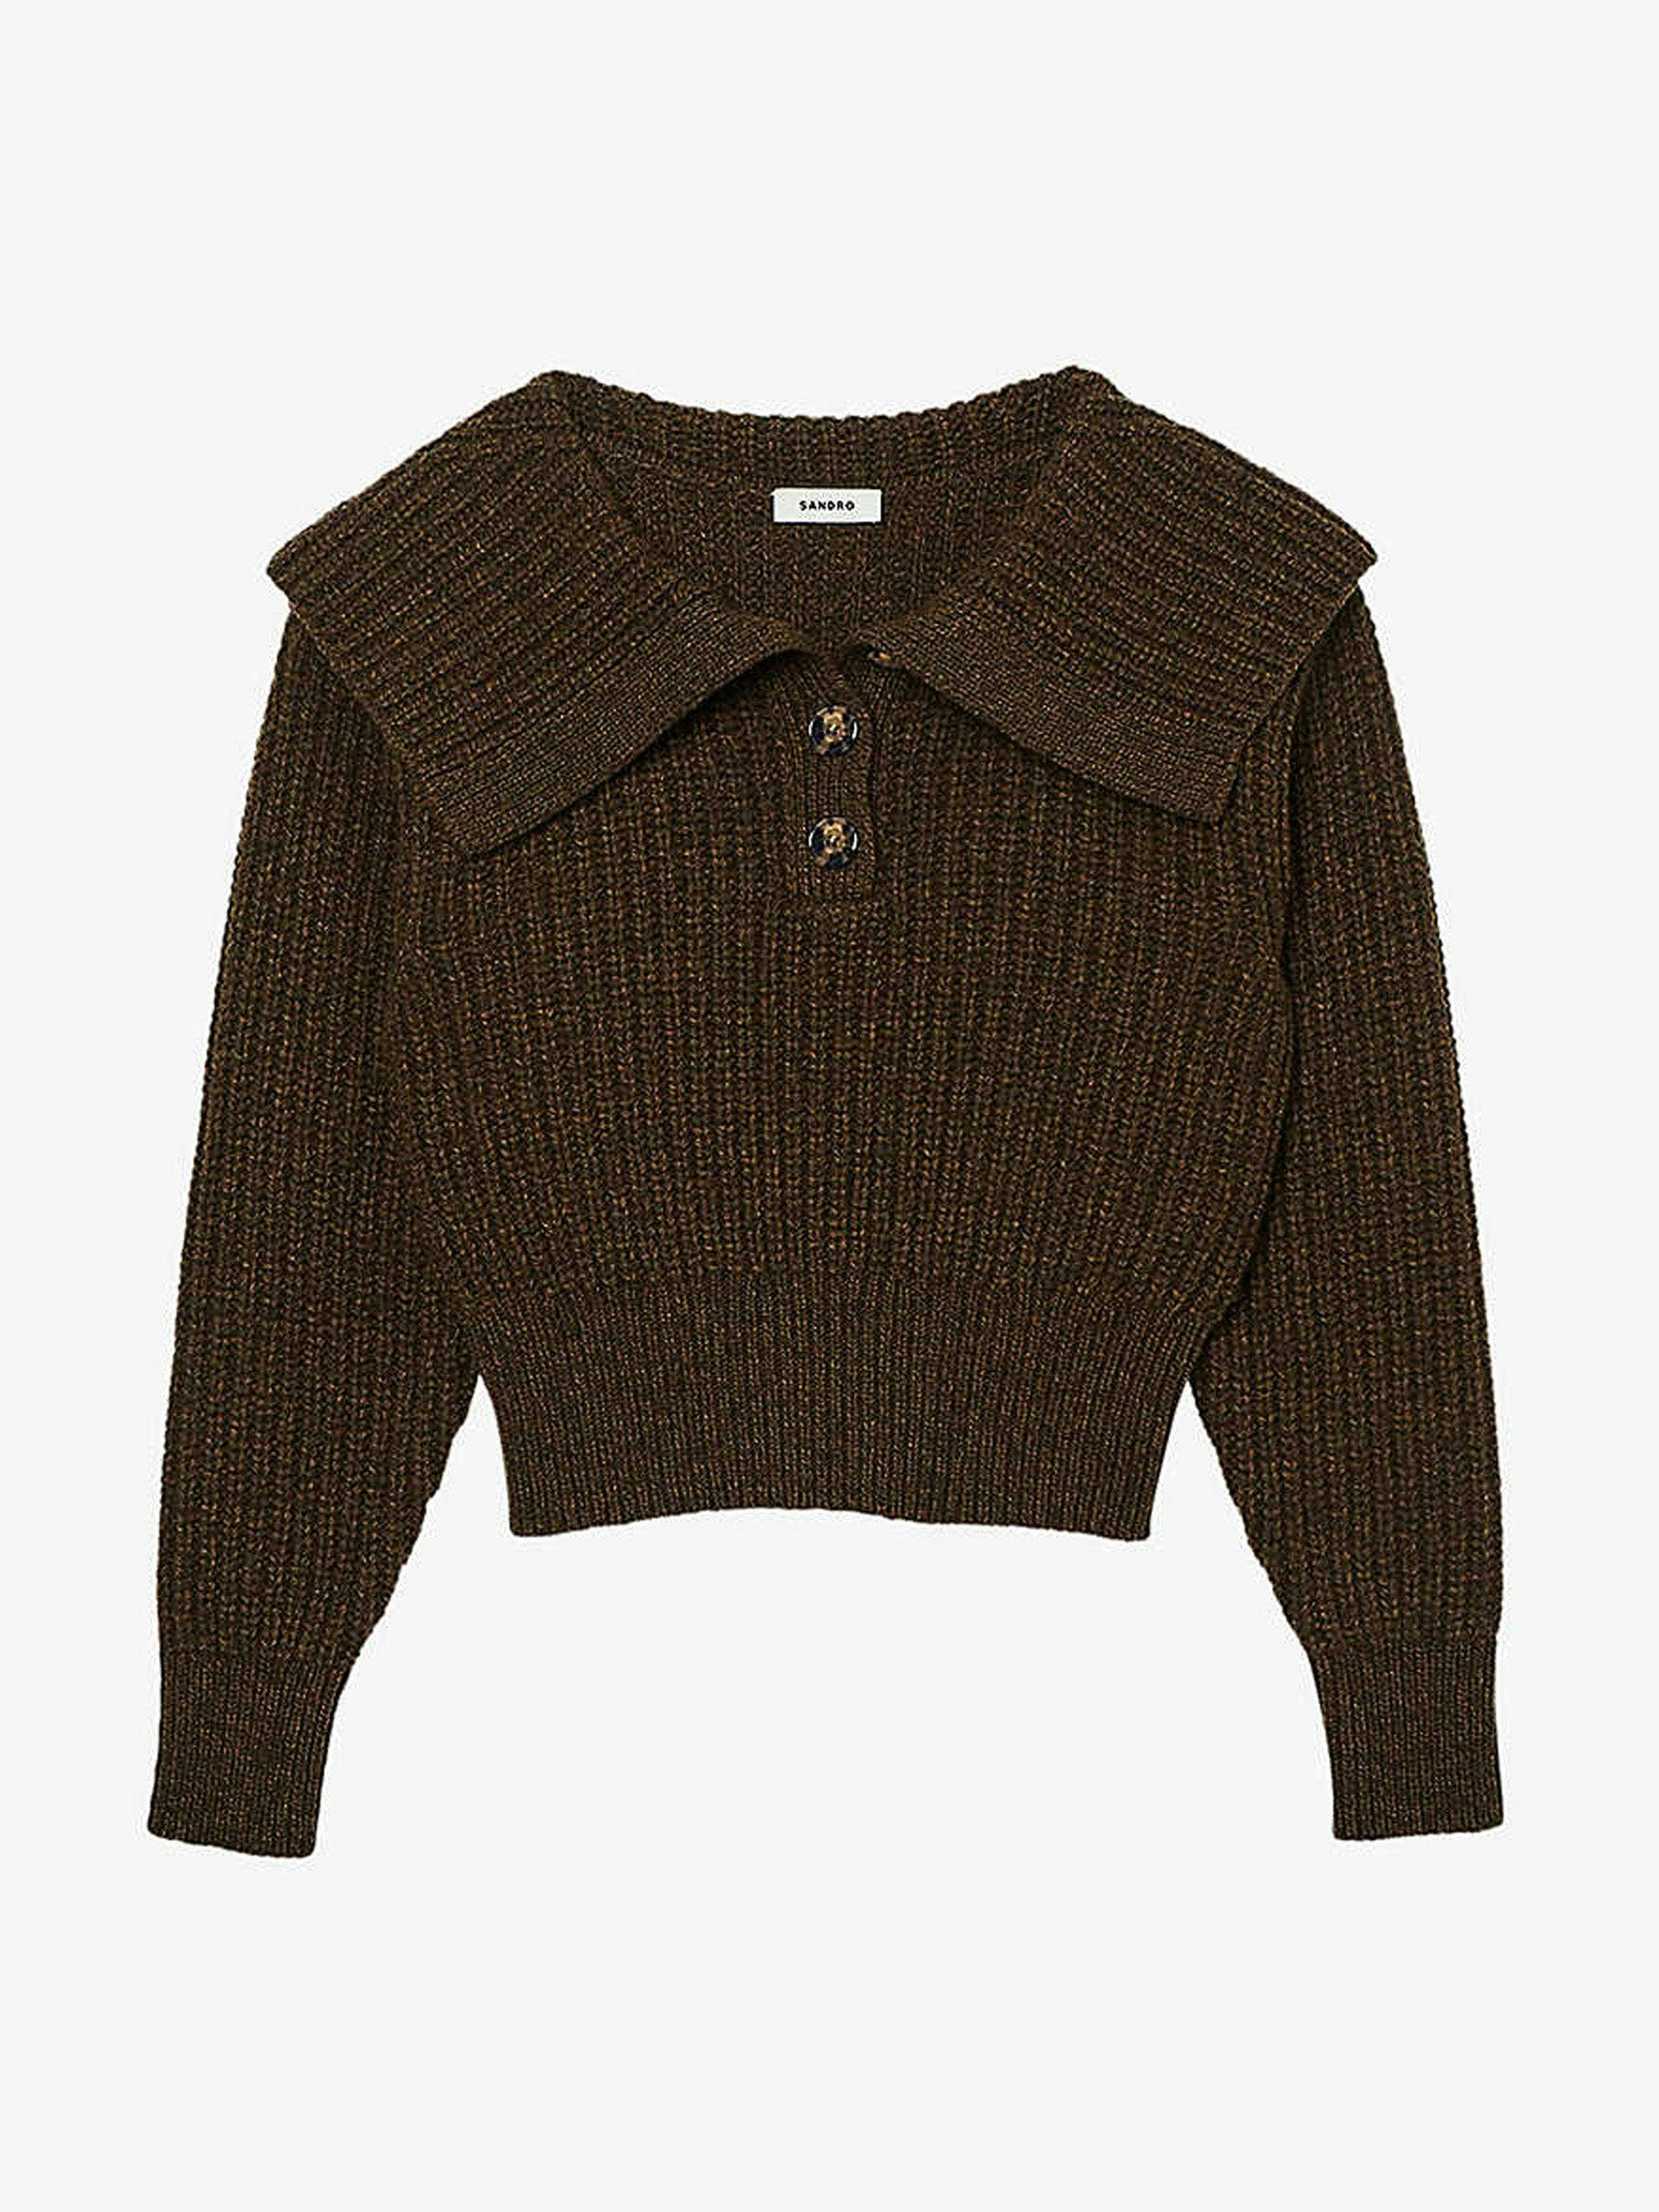 Brown open-collar cable-knit jumper